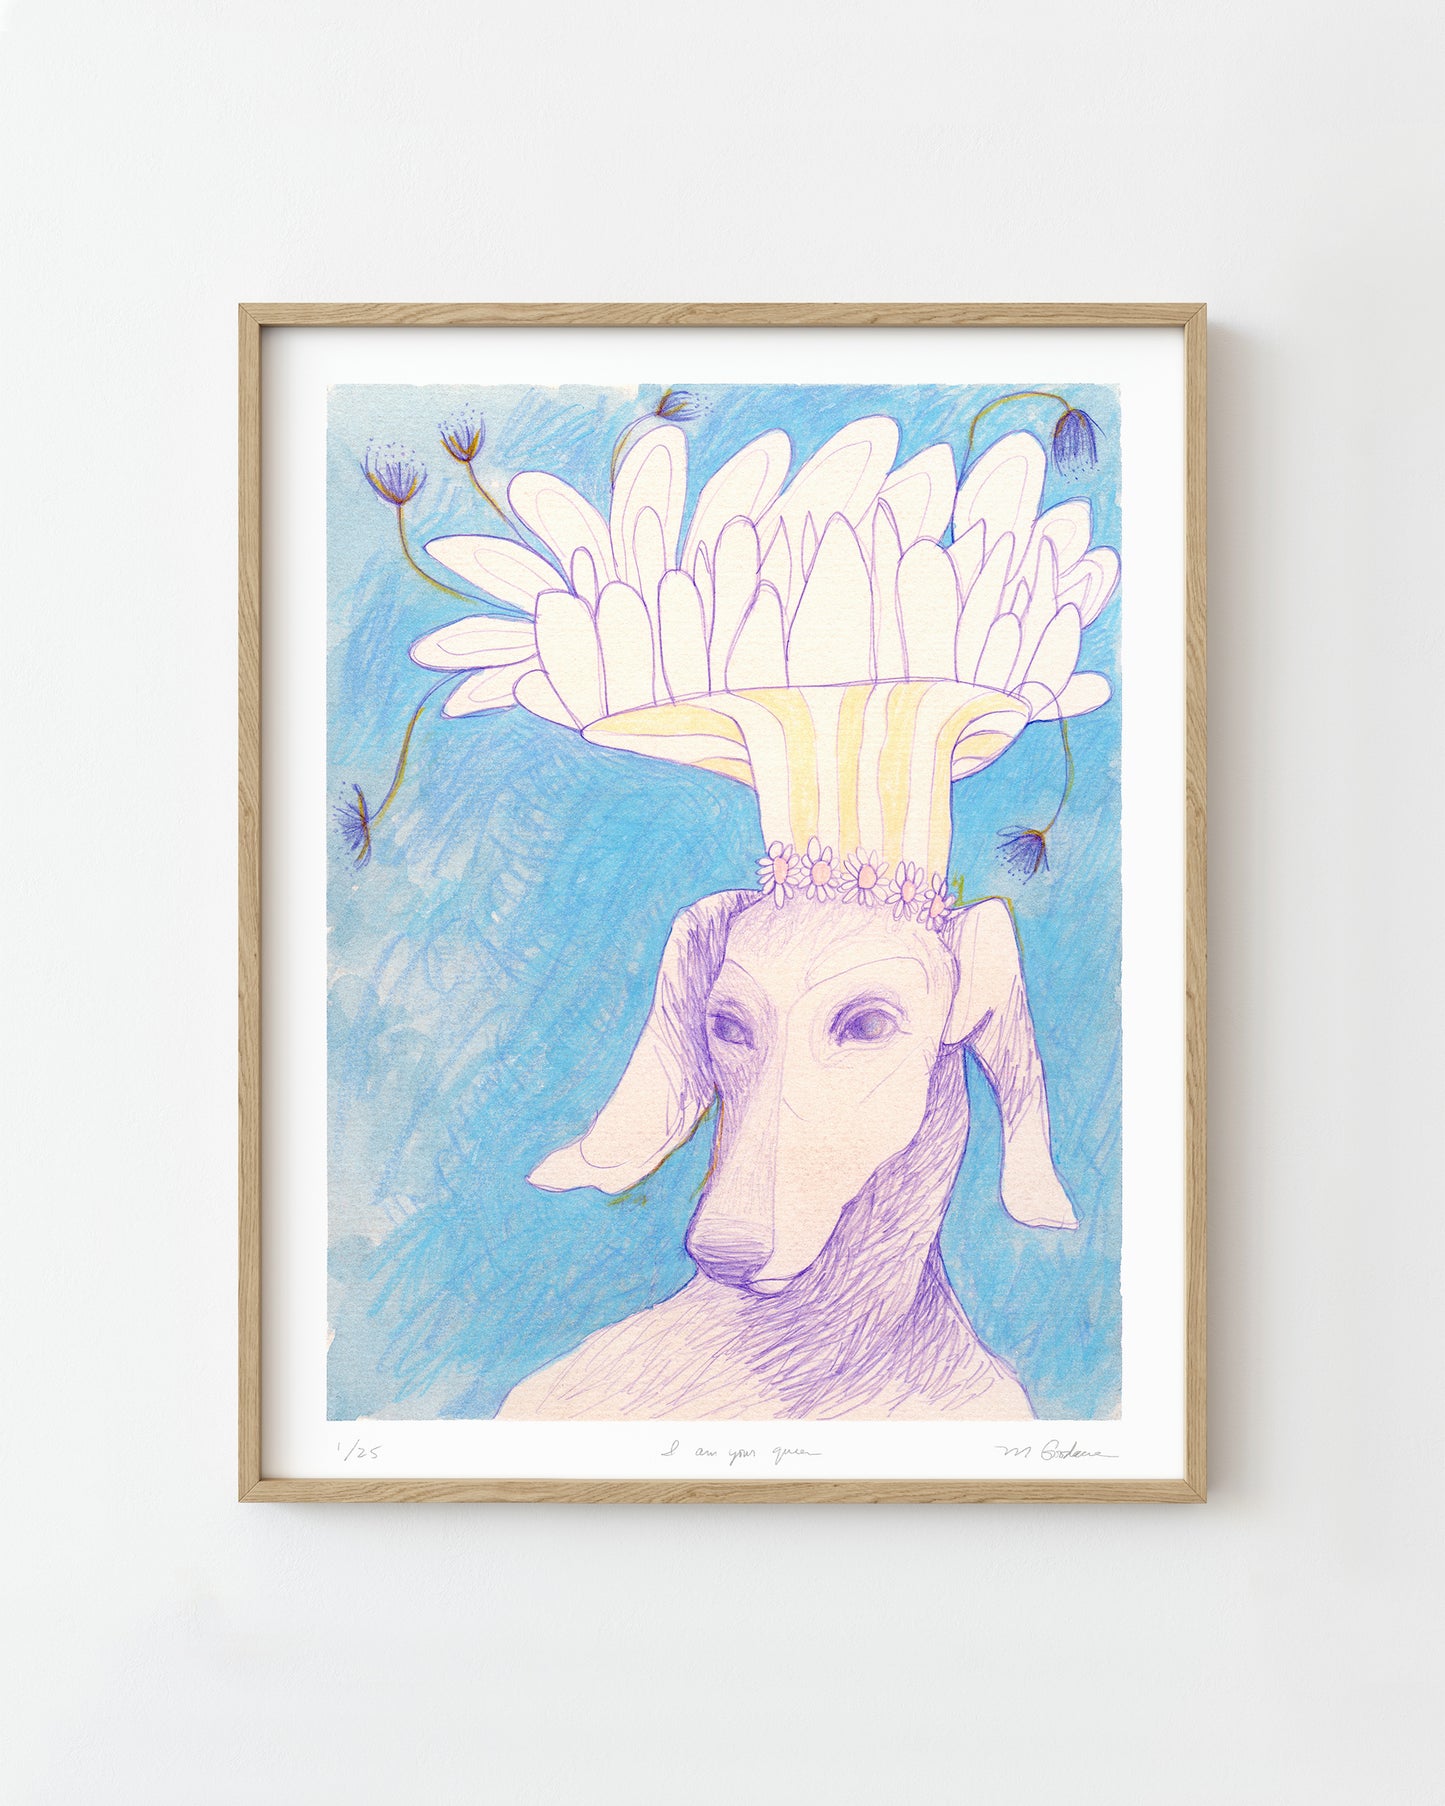 Framed semi-abstract drawing of a greyhound wearing a crown of flowers.